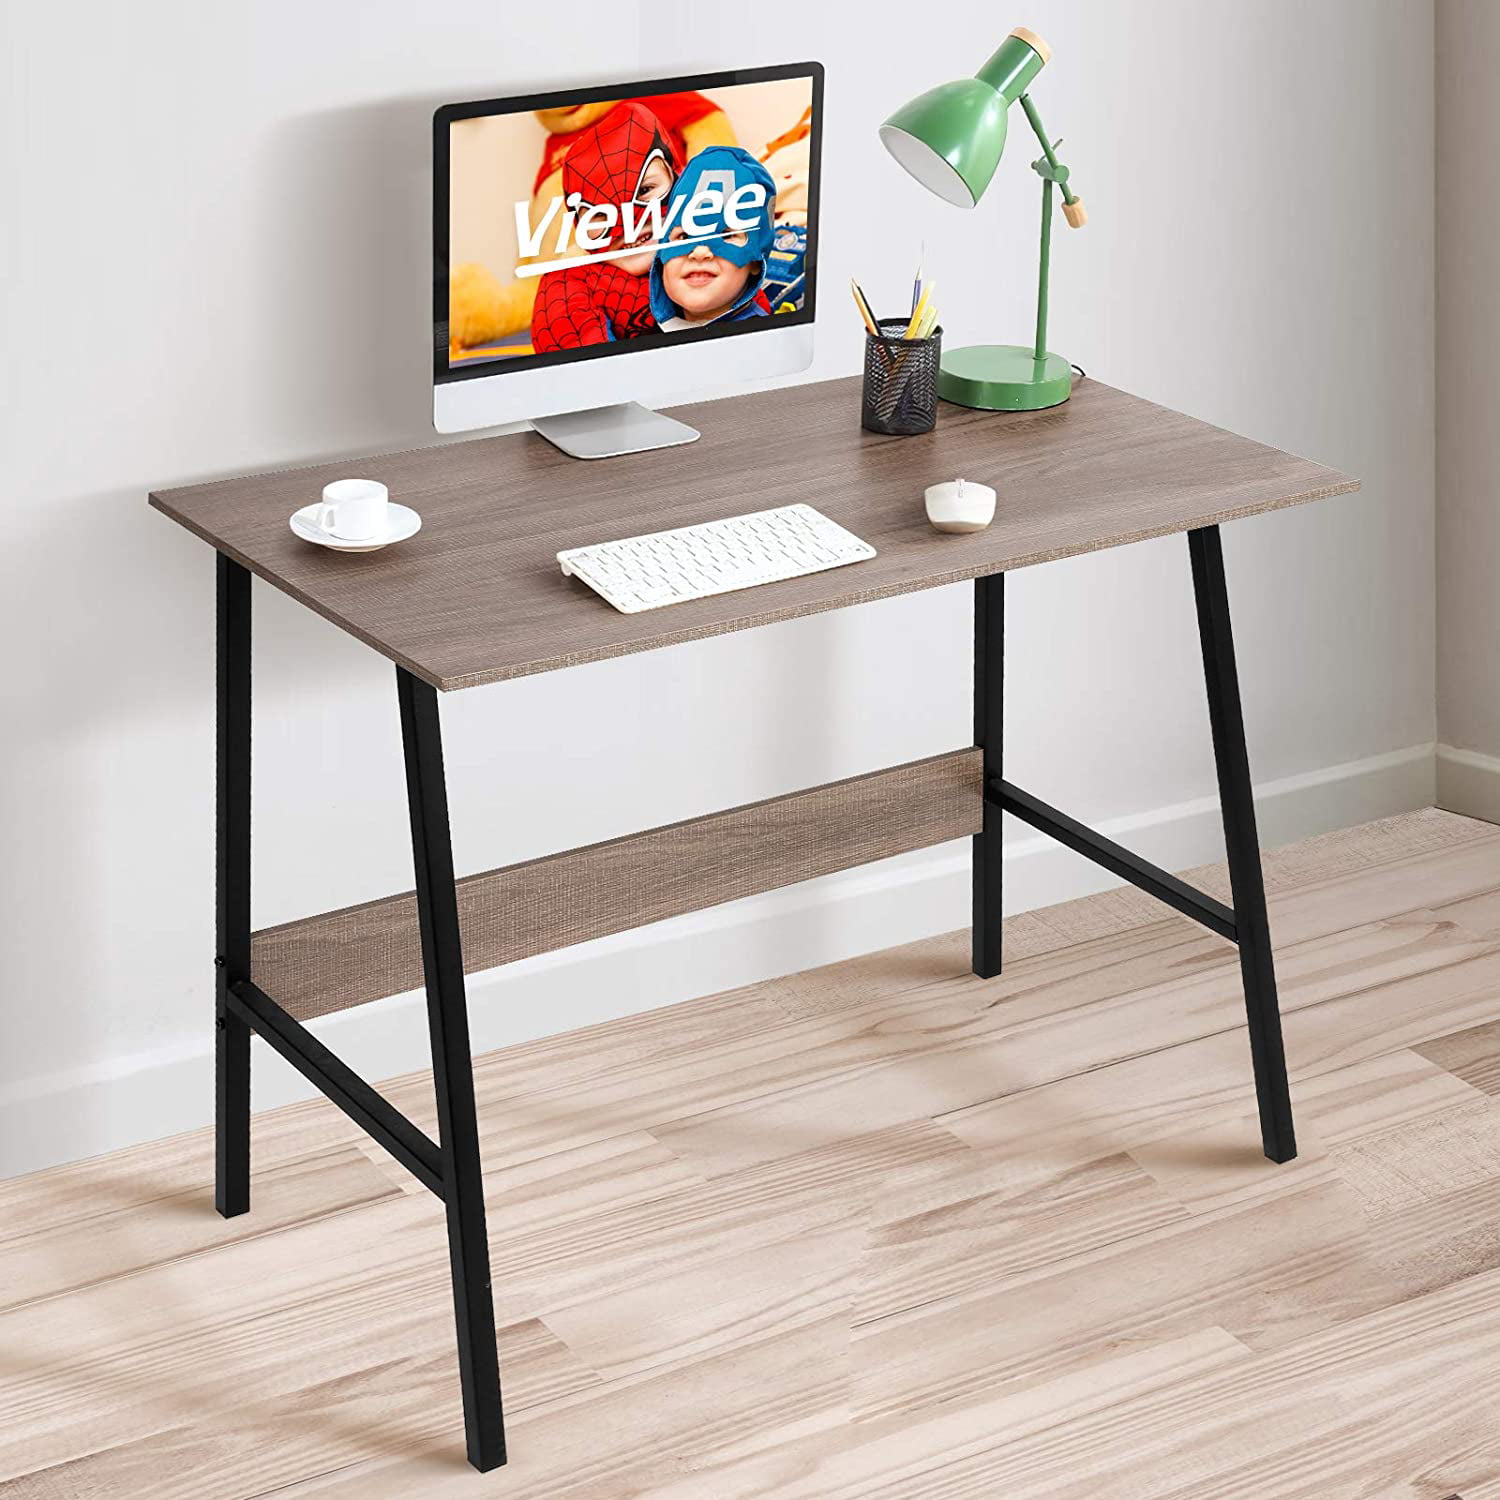 Details about   Modern Wood Computer Desk PC Workstation Study Table Home Office Writing Table 